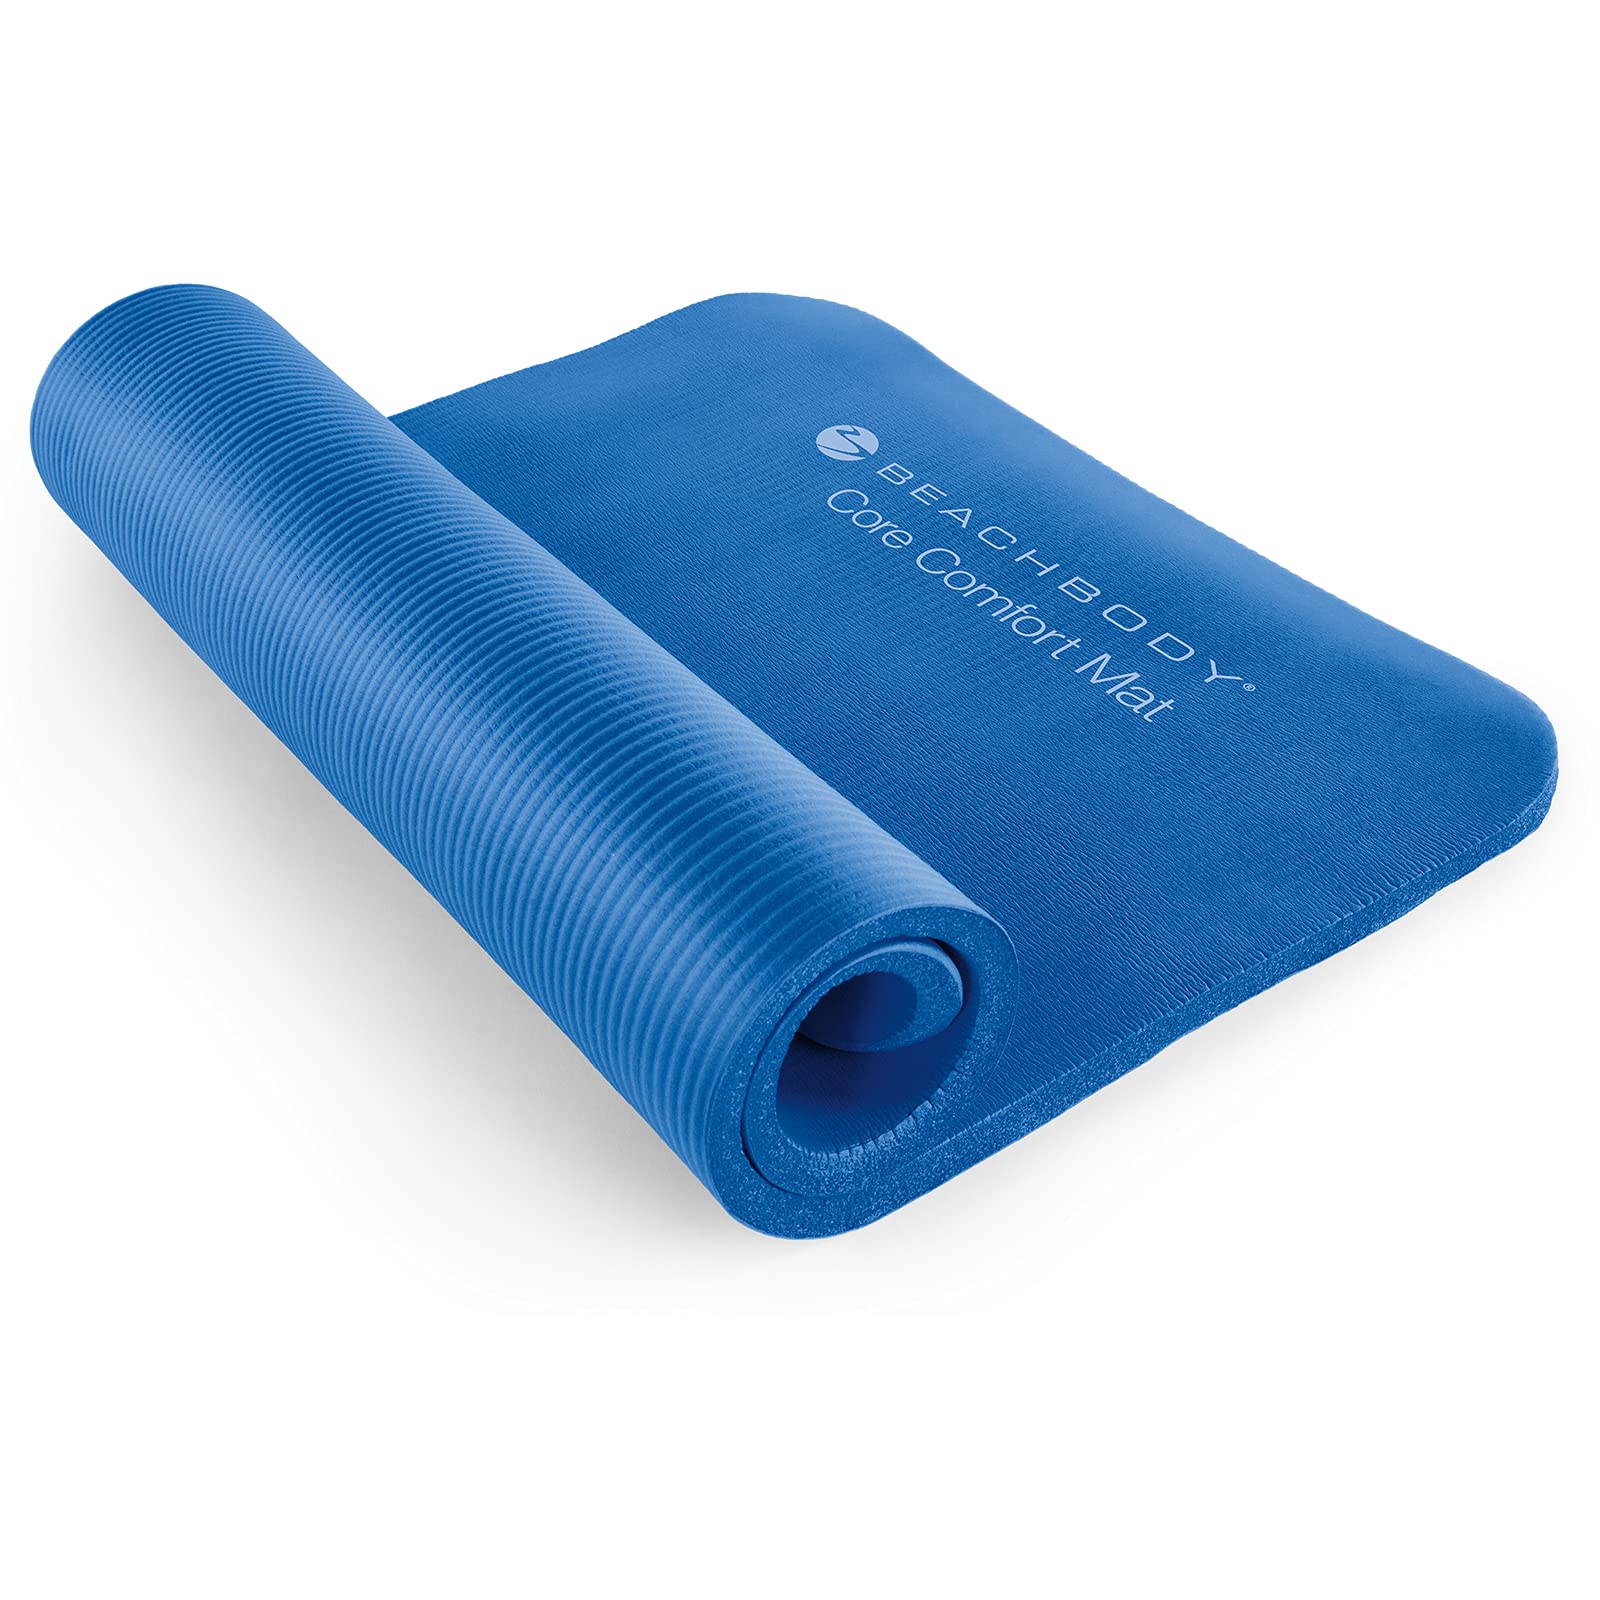 Beachbody Exercise Mat, Thick Foam Mat for Jumping, Fitness, Gym or Home  Workouts, Yoga, Ab workouts, Stretching, Weightlifting, Slip Resistant,  High Density & Ultra Durable Blue